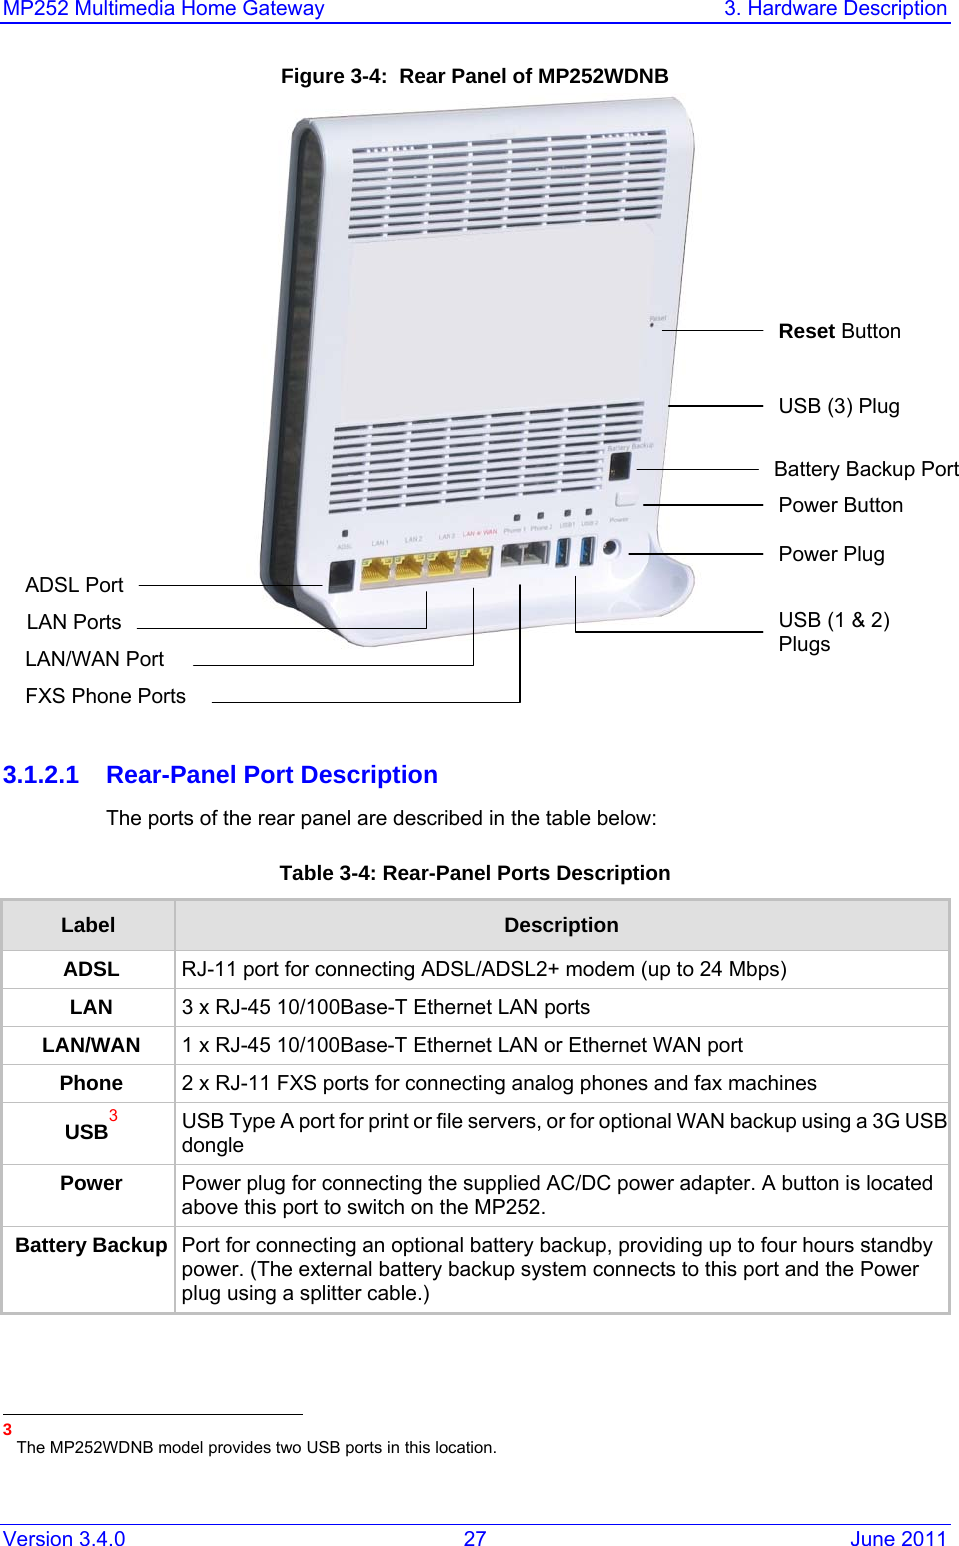 MP252 Multimedia Home Gateway  3. Hardware Description Version 3.4.0  27  June 2011 Figure 3-4:  Rear Panel of MP252WDNB    3.1.2.1  Rear-Panel Port Description The ports of the rear panel are described in the table below: Table 3-4: Rear-Panel Ports Description Label  Description ADSL  RJ-11 port for connecting ADSL/ADSL2+ modem (up to 24 Mbps) LAN  3 x RJ-45 10/100Base-T Ethernet LAN ports LAN/WAN  1 x RJ-45 10/100Base-T Ethernet LAN or Ethernet WAN port Phone  2 x RJ-11 FXS ports for connecting analog phones and fax machines USB3 USB Type A port for print or file servers, or for optional WAN backup using a 3G USBdongle Power  Power plug for connecting the supplied AC/DC power adapter. A button is located above this port to switch on the MP252. Battery Backup  Port for connecting an optional battery backup, providing up to four hours standby power. (The external battery backup system connects to this port and the Power plug using a splitter cable.)                                                       3 The MP252WDNB model provides two USB ports in this location. Reset ButtonBattery Backup Port Power Plug USB (3) Plug FXS Phone Ports LAN/WAN Port ADSL Port LAN Ports  USB (1 &amp; 2) Plugs Power Button 